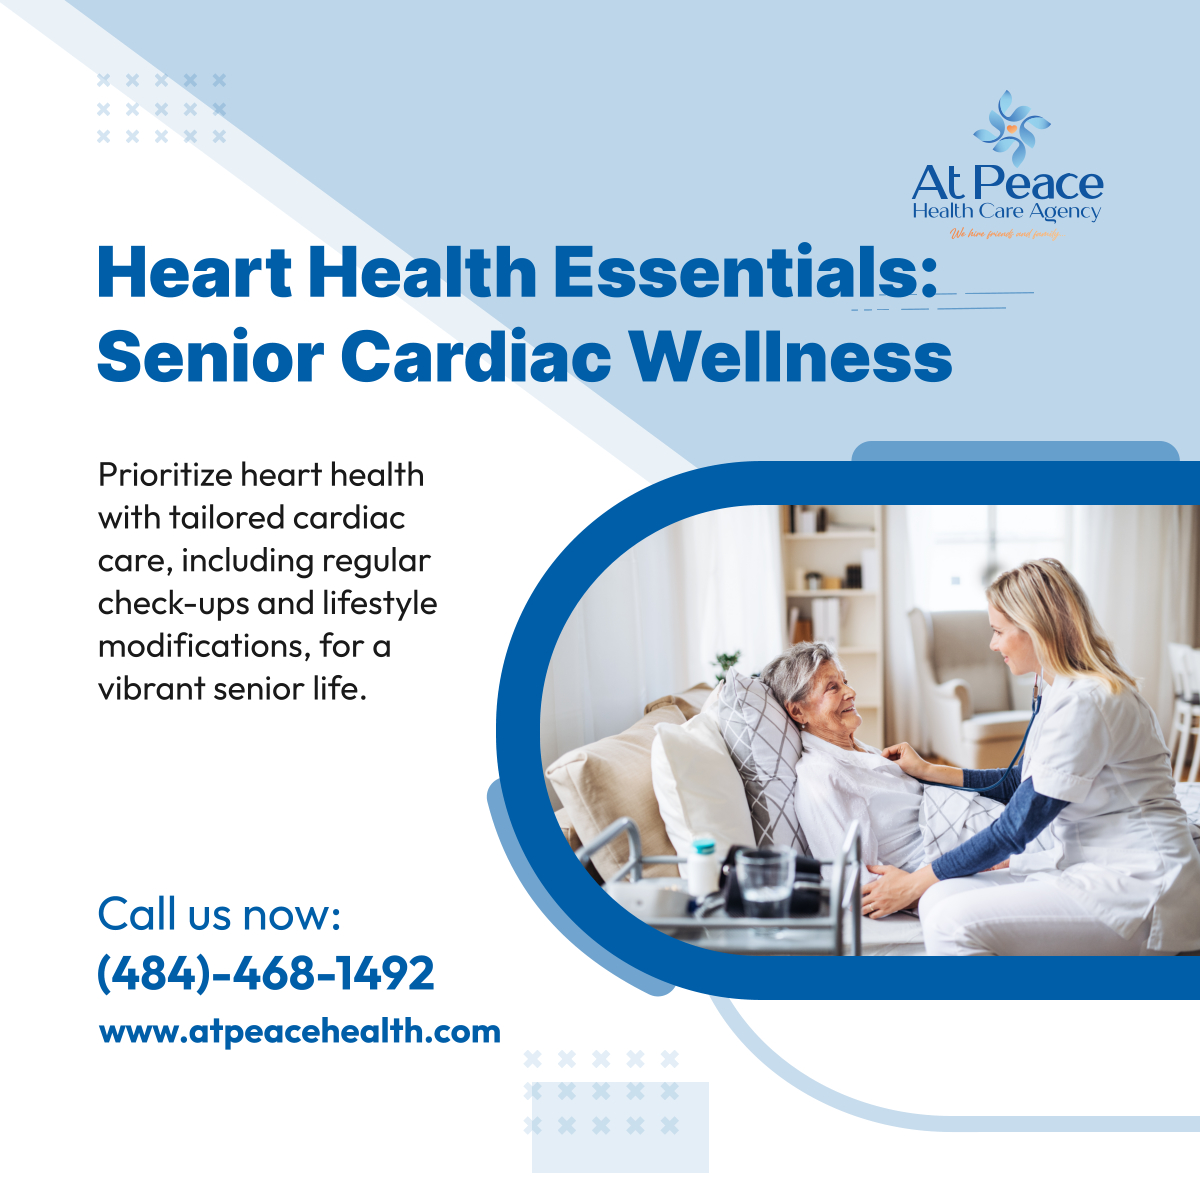 Embrace a heart-healthy lifestyle with proper nutrition, exercise, and stress management, ensuring a fulfilling life post-retirement. To learn more, continue reading at tinyurl.com/376ffrfd. 

#PhiladelphiaPA #HomeHealthCare #HeartHealthSeniors